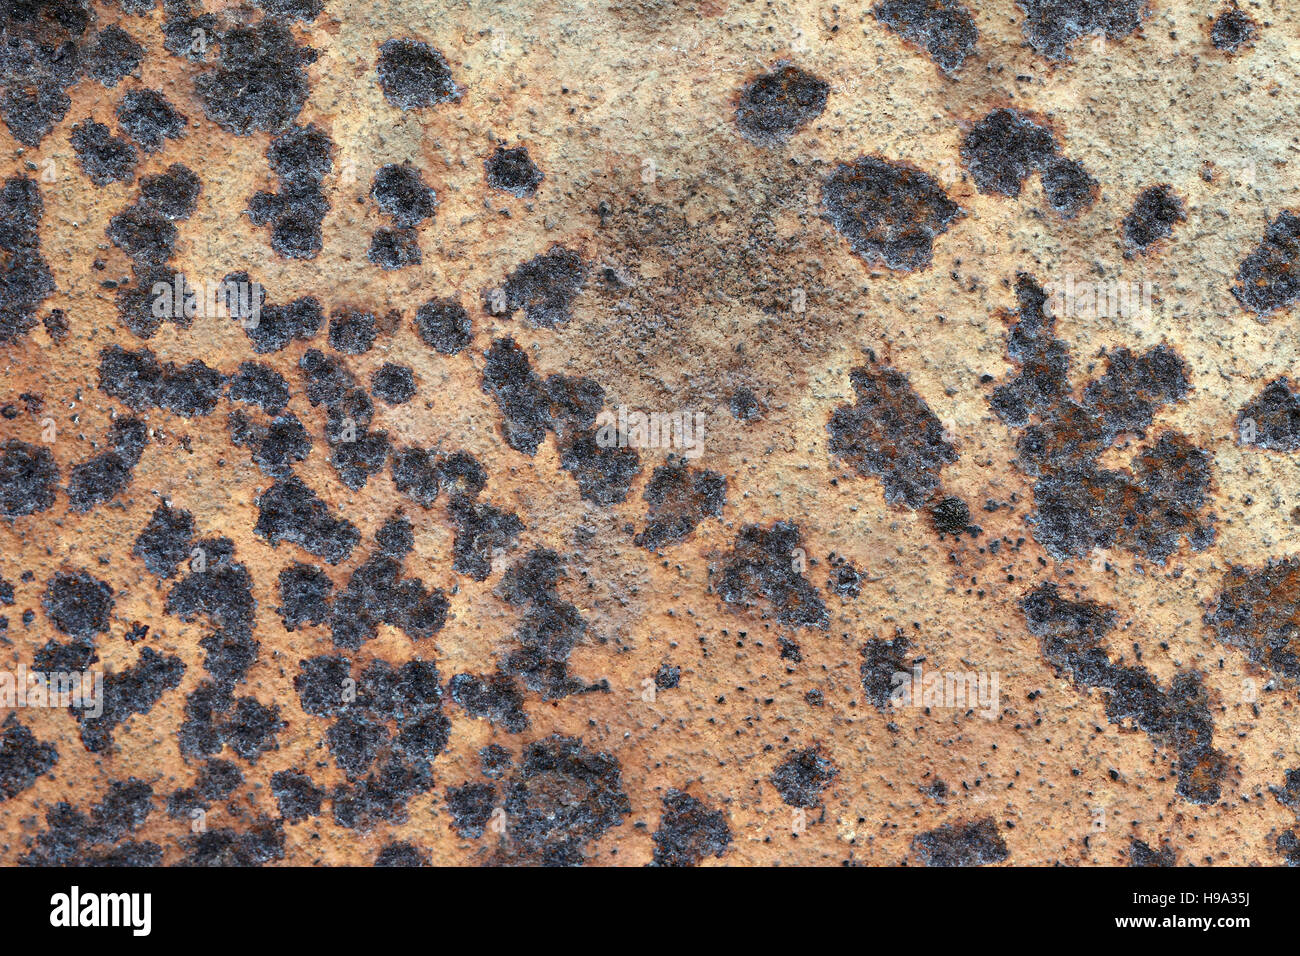 Corroded and worn surface of the iron plate Stock Photo